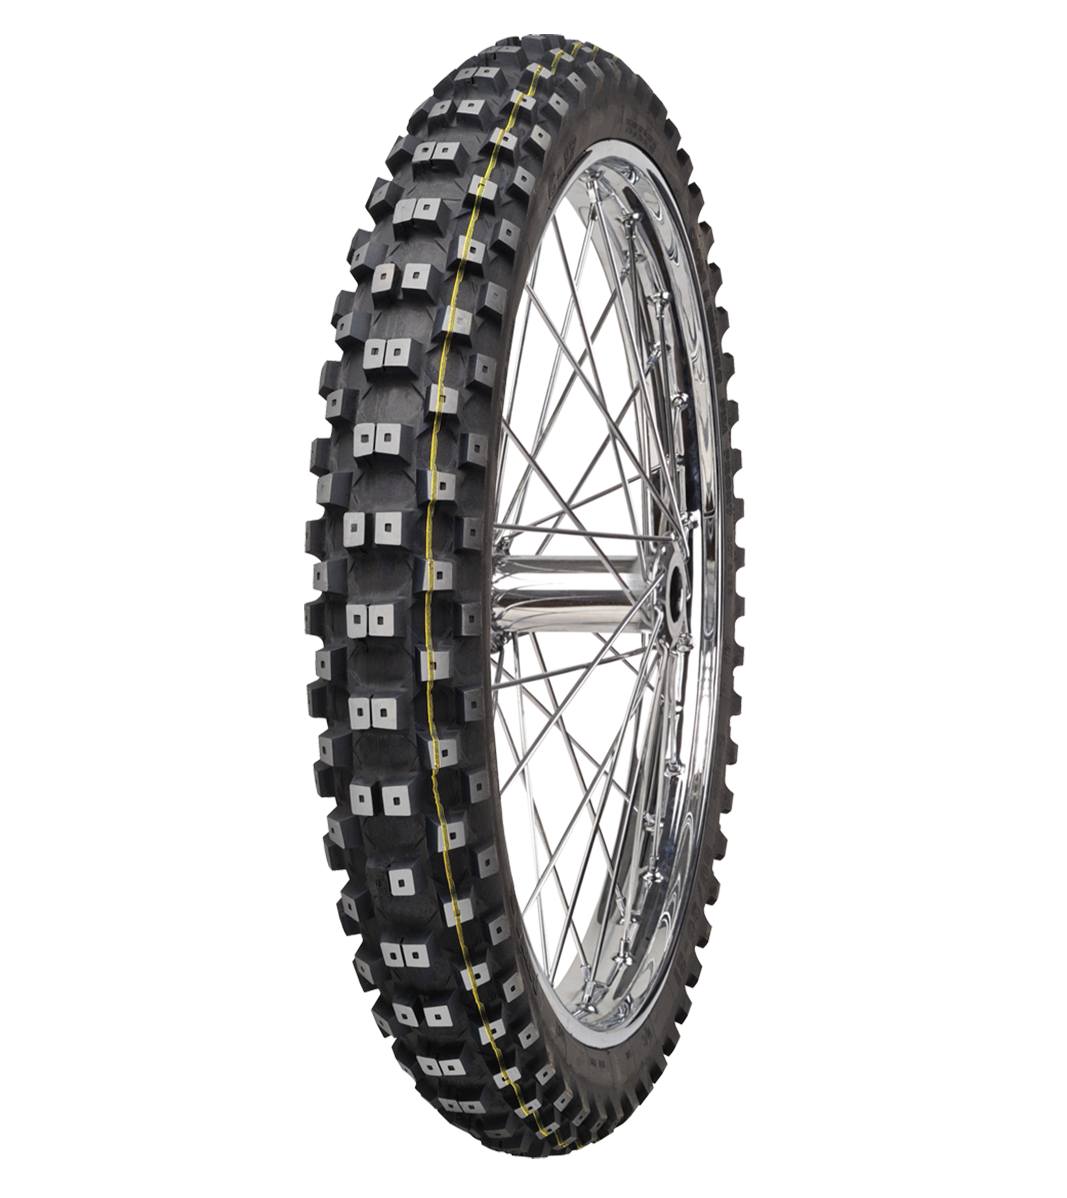 Mitas C-17 STONEATER 90/90-21 Trail OFF Trail DAKAR 54R Yellow Tube Front Tire, 226705, 90/90-21, C-17 StonEater, Front, Trail, Trail OFF, Tires - Imported and distributed in North &amp; South America by Lindeco Genuine Powersports - Premier Powersports Equipment and Accessories for Motorcycle Enthusiasts, Professional Riders and Dealers.